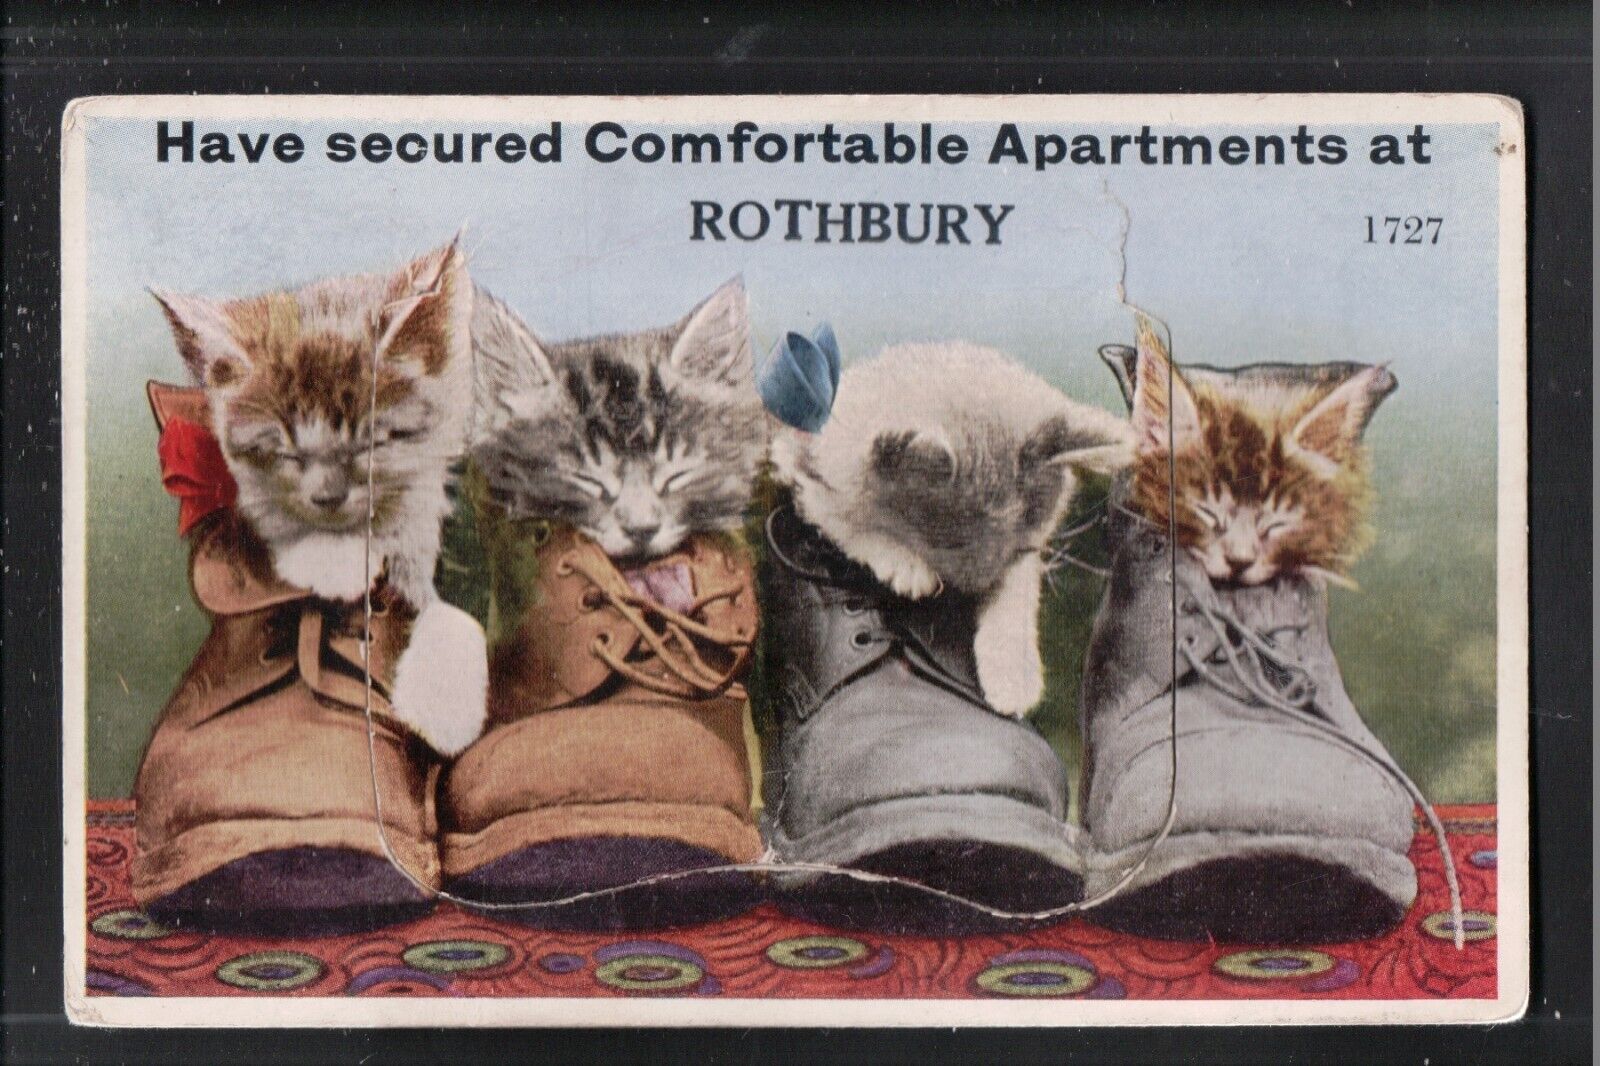 House Clearance - Have Secured Comfortable Apartments At ROTHBURY 1938 Mailing Novelty Service